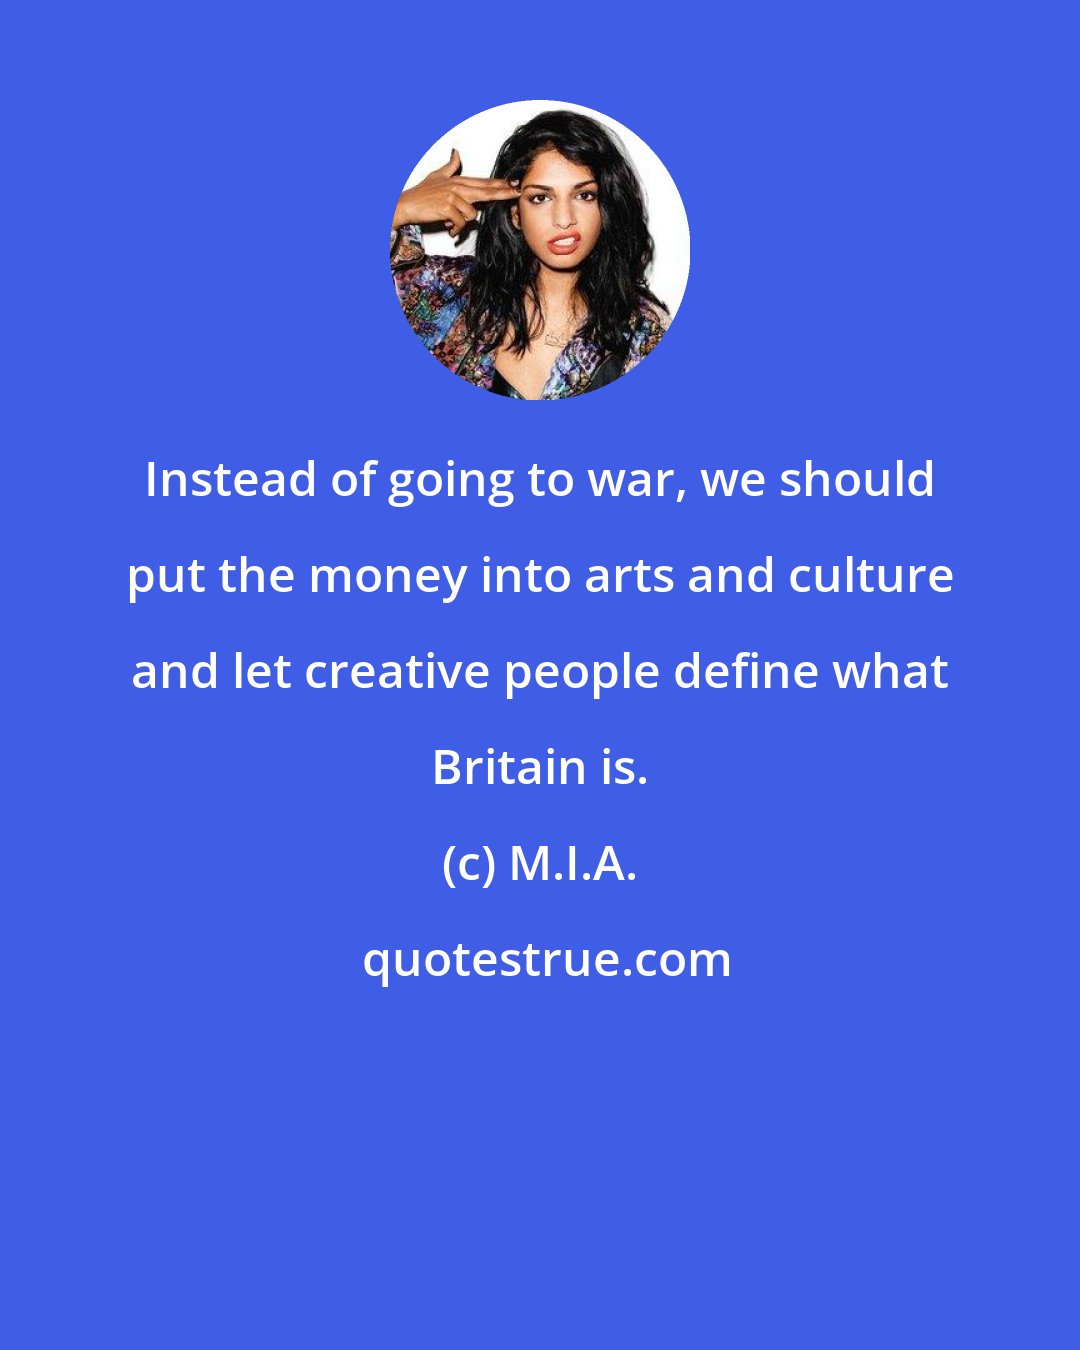 M.I.A.: Instead of going to war, we should put the money into arts and culture and let creative people define what Britain is.